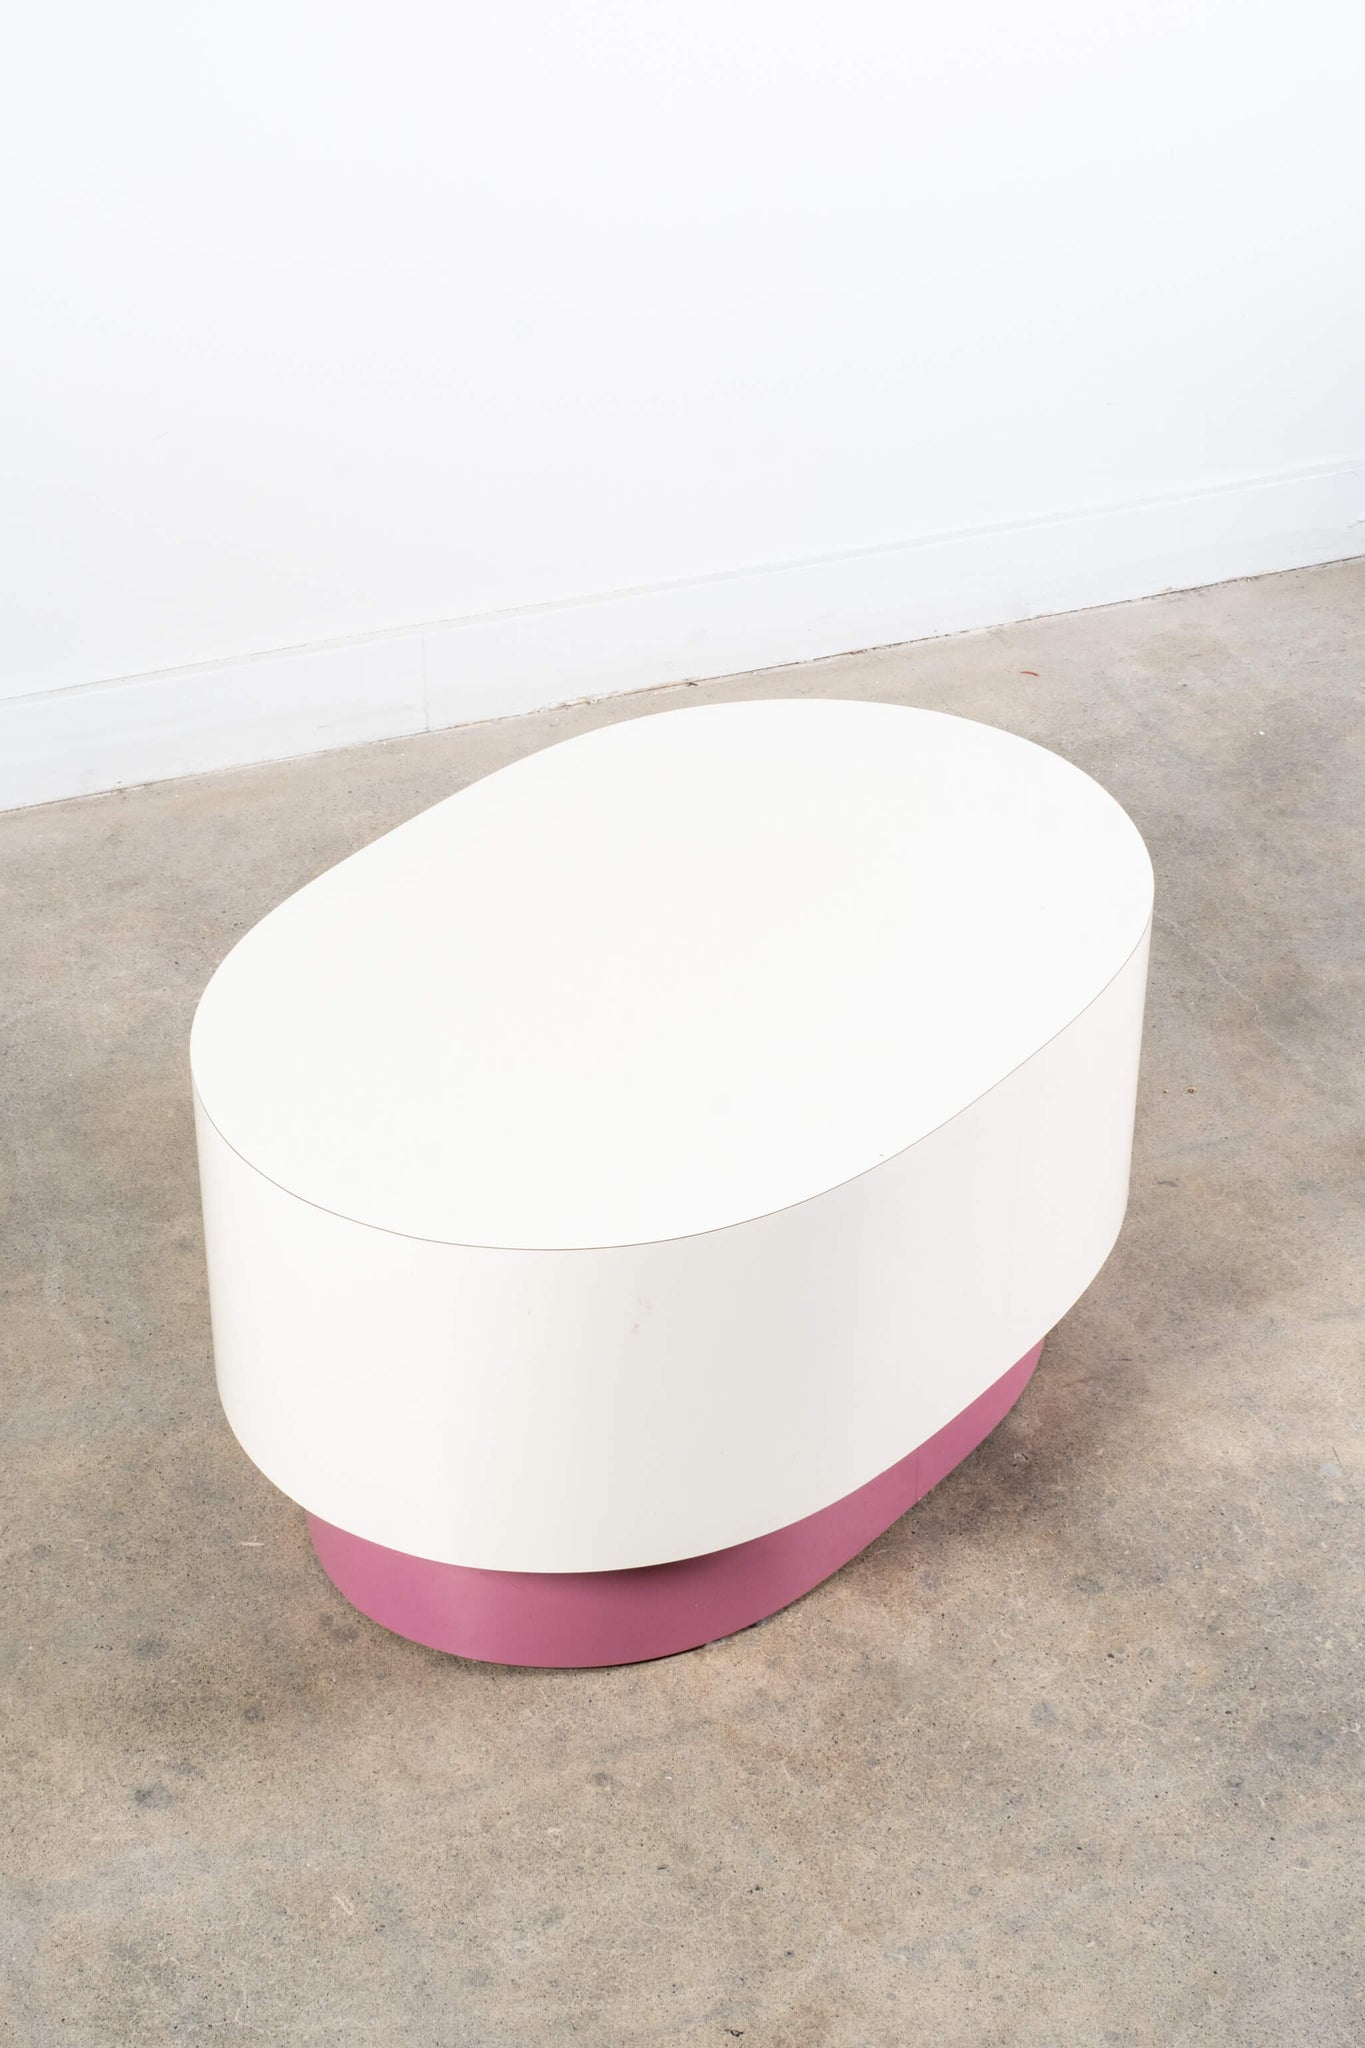 Vintage White and Pink Laminate Lipstick Coffee Table, top view